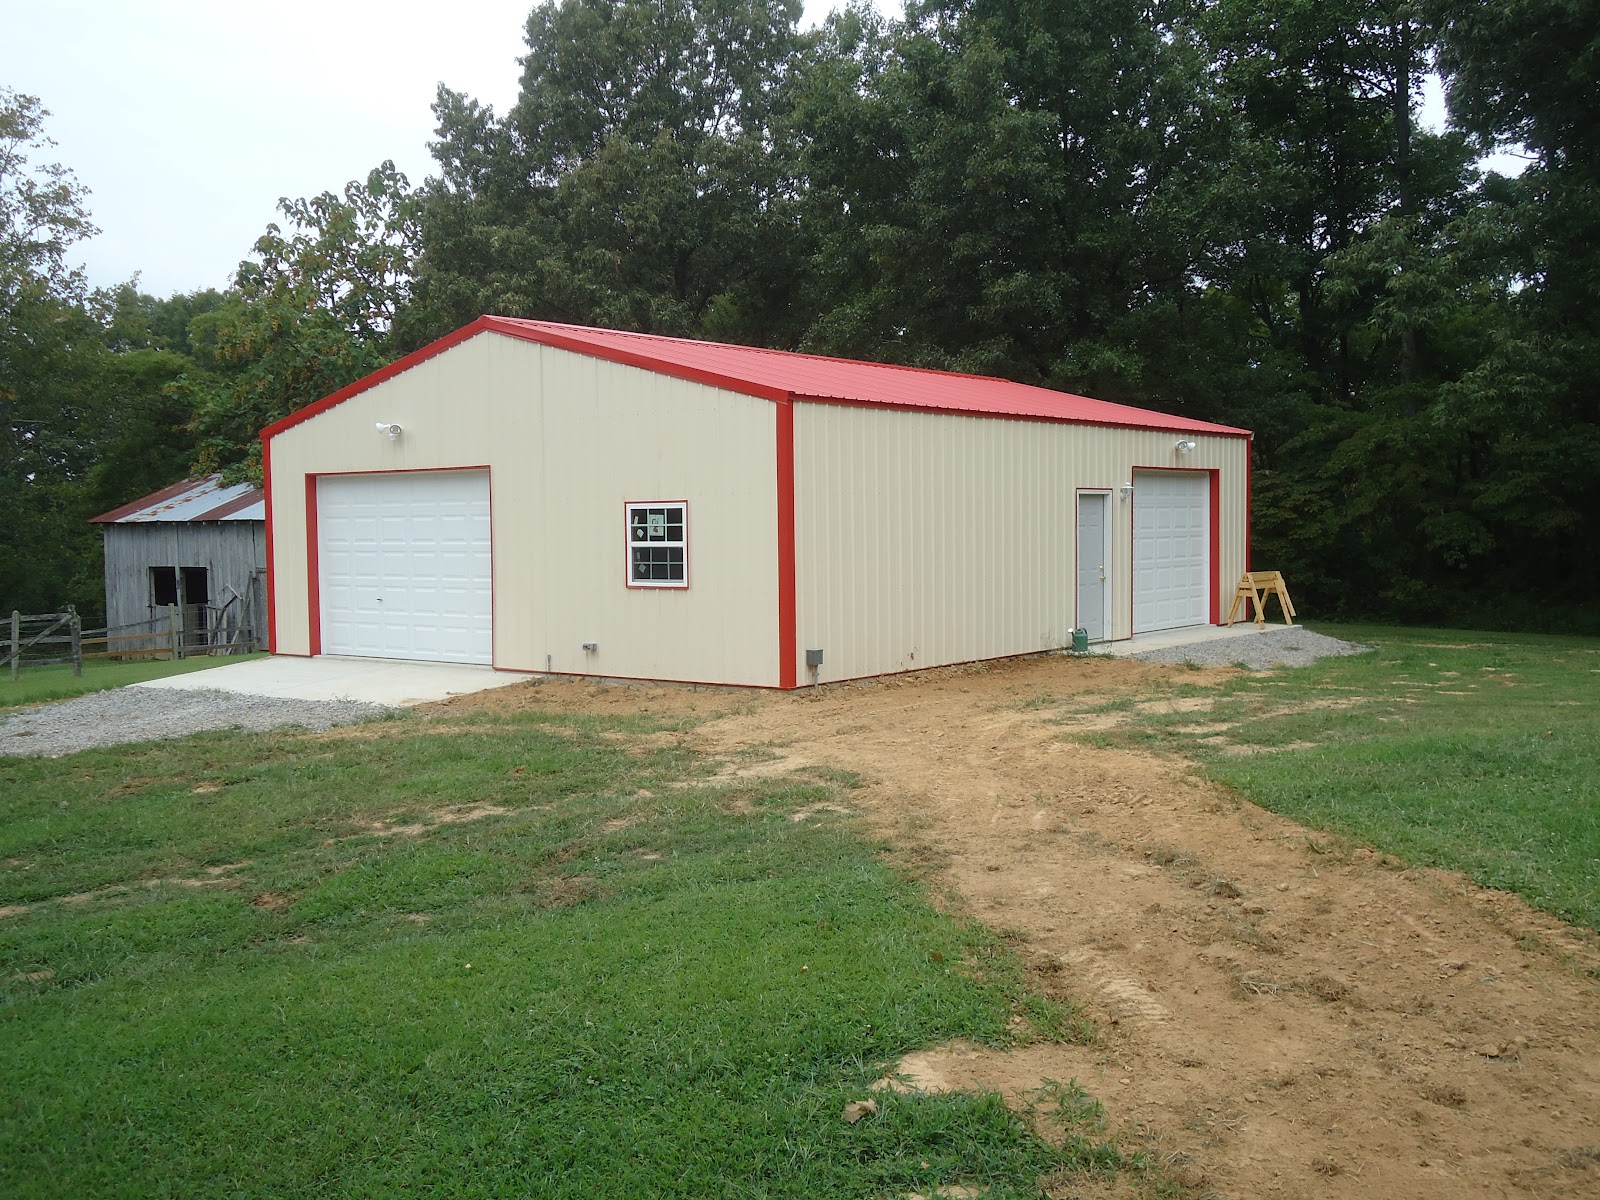 Pole Barn Designs – Planning and Constructing a Pole Barn Shed